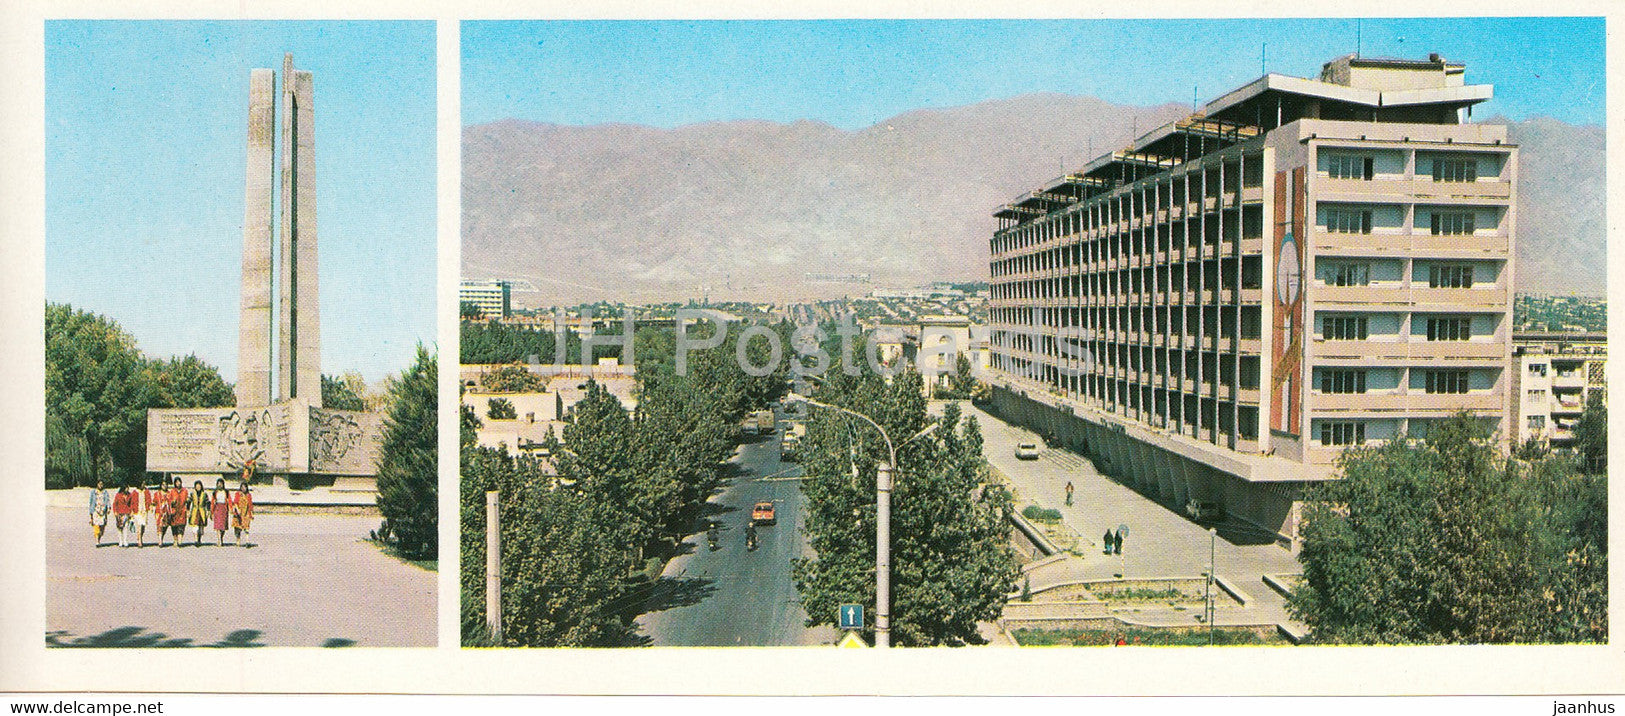 Leninabad - Khujand - monument to the soldiers who died in WWII - Lenin street - 1979 - Tajikistan USSR - unused - JH Postcards